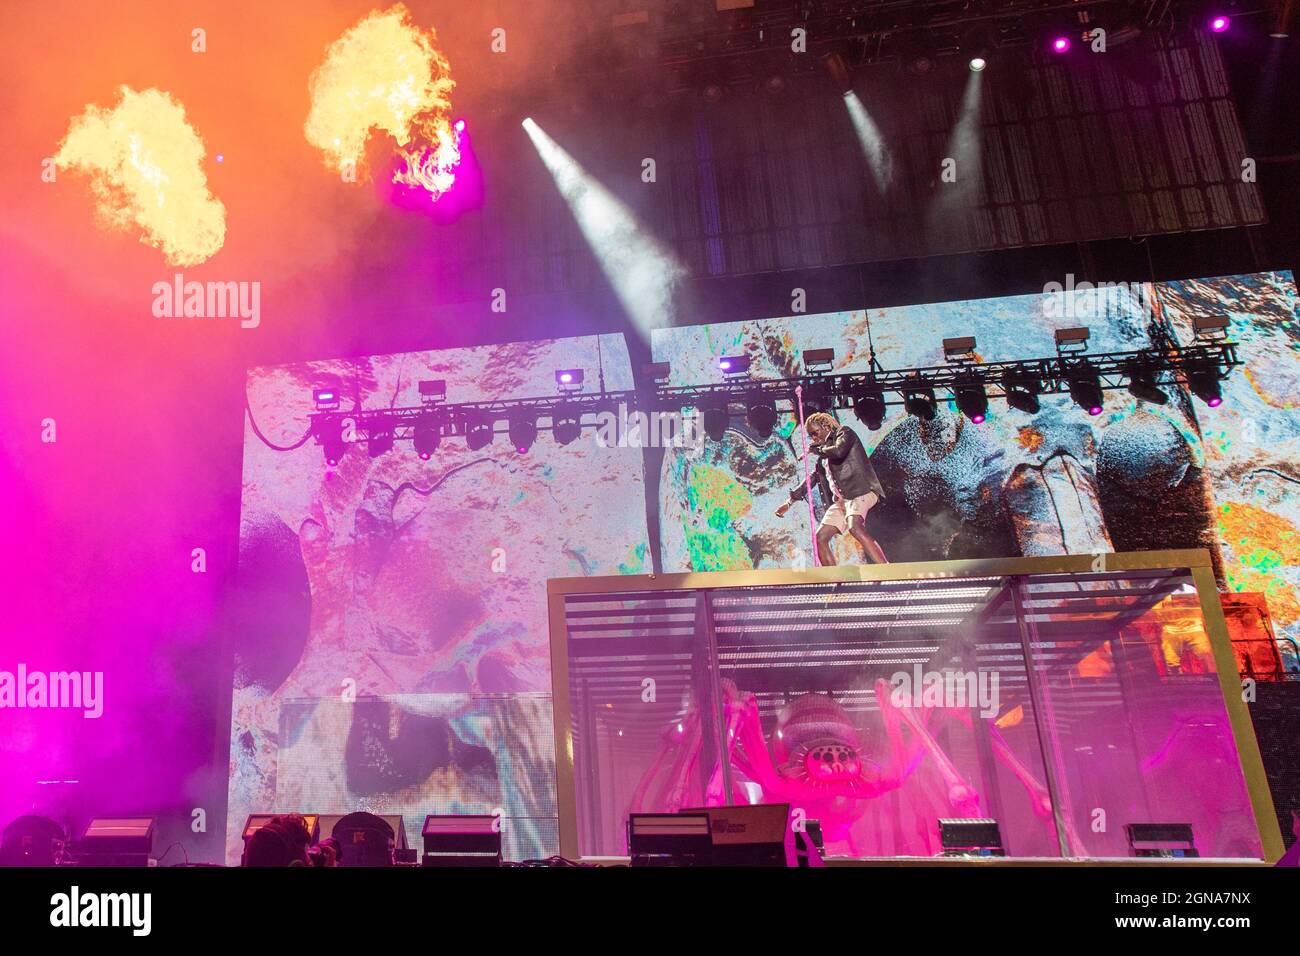 Texas, USA. 09th Nov, 2019. Playboi Carti performs during the second annual  Astroworld Festival at NRG Park on November 9, 2019 in Houston, Texas.  Credit: MediaPunch Inc/Alamy Live News Stock Photo - Alamy